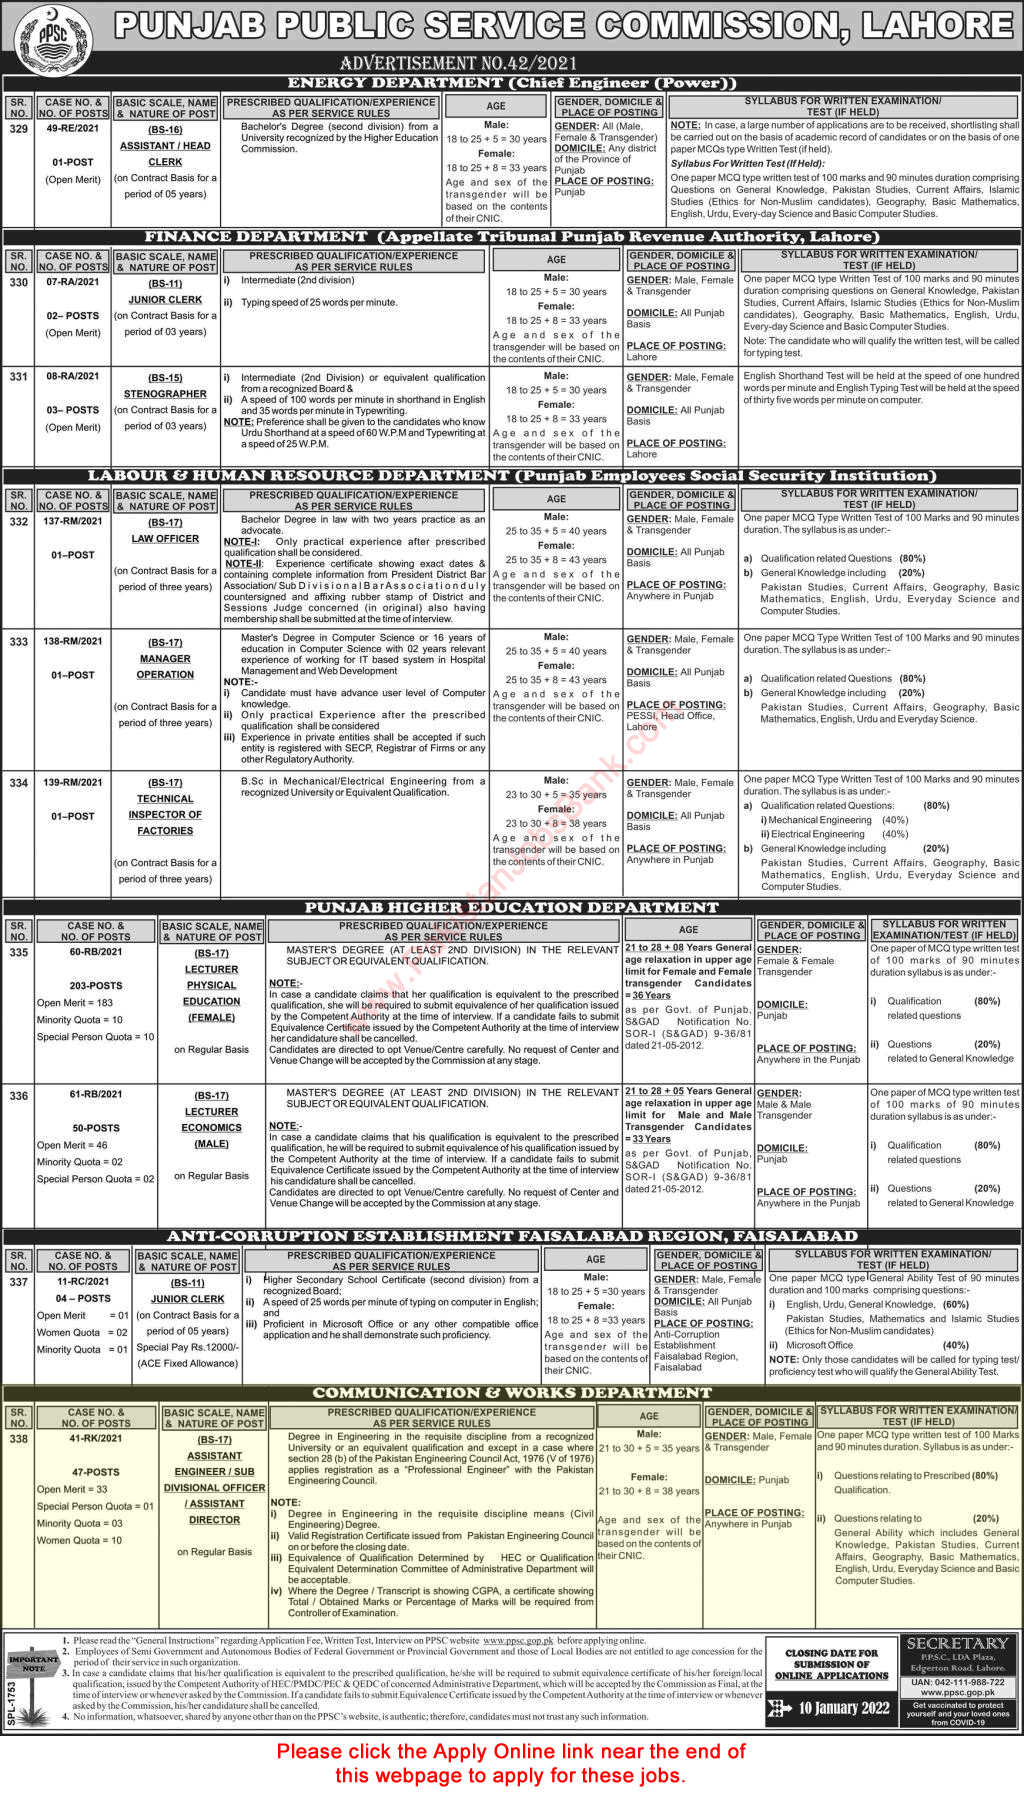 Civil Engineer Jobs in Communication and Works Department Punjab December 2021 / 2022 PPSC Apply Online SDO Latest